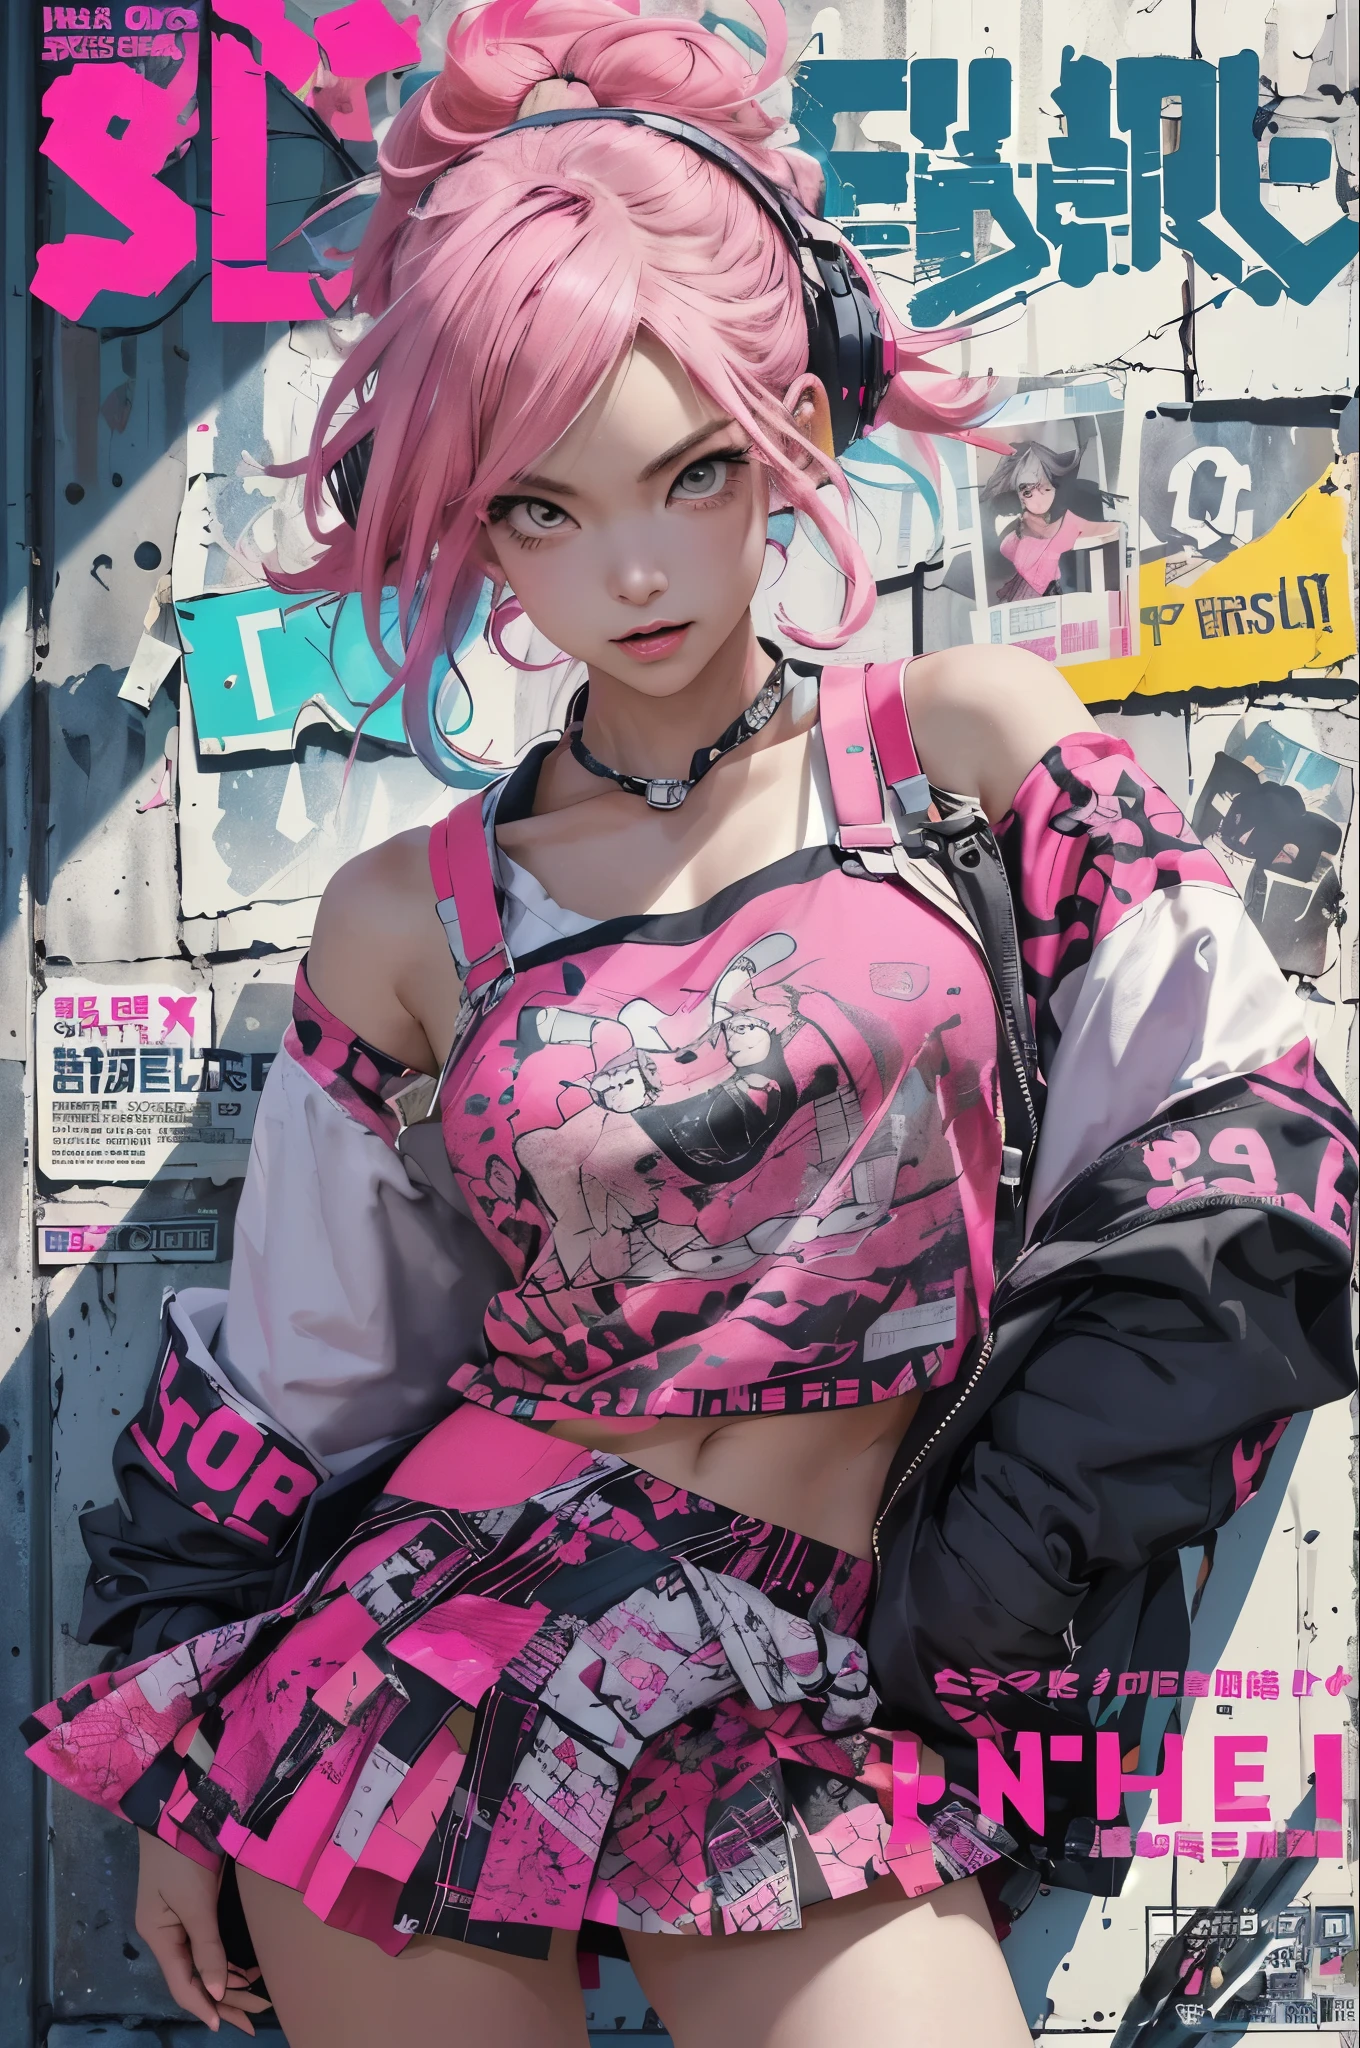 ((((dramatic))), (((gritty))), (((intense))) film poster featuring a neon pink hair young woman as the central character. She stands confidently in the center of the poster, wearing a stylish and edgy cat ear headphones Harajuku-inspired  and school girl skirt, with a determined seductive expression on her face. The background is colorful and vibrant, with a sense of danger and intensity. The text is bold and attention-grabbing, with a catchy tagline that adds to the overall feeling of drama and excitement. The color palette is perfect mainly bright with splashes of vibrant colors, giving the poster a dynamic and visually striking appearance,tachi-e
(magazine:1.3), (cover-style:1.3), fashionable, woman, vibrant, school girl outfit, sexy seductive slutty posing, front, colorful, dynamic, background, elements, confident, seductive expression, holding, statement, accessory, majestic, coiled, around, touch, scene, text, cover, bold, attention-grabbing, title, stylish, font, catchy, headline, larger, striking, modern, trendy, focus, Harajuku-inspired fashion,